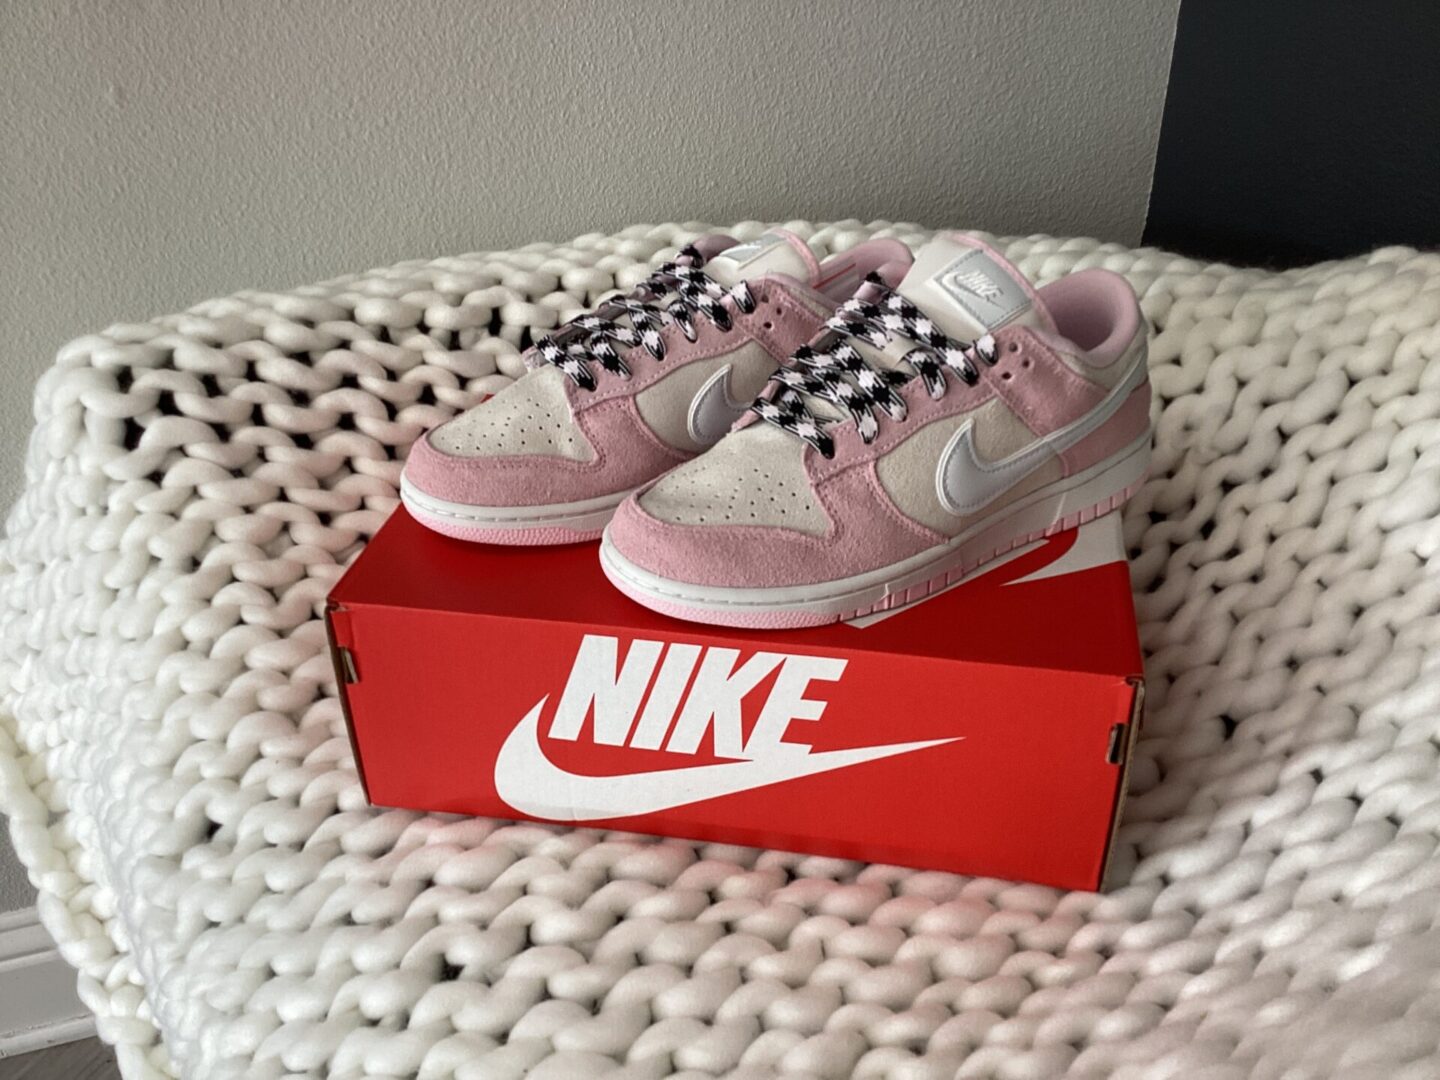 A pair of pink W Nike Dunk Low sneakers placed on top of their red shoebox on a white knitted blanket.